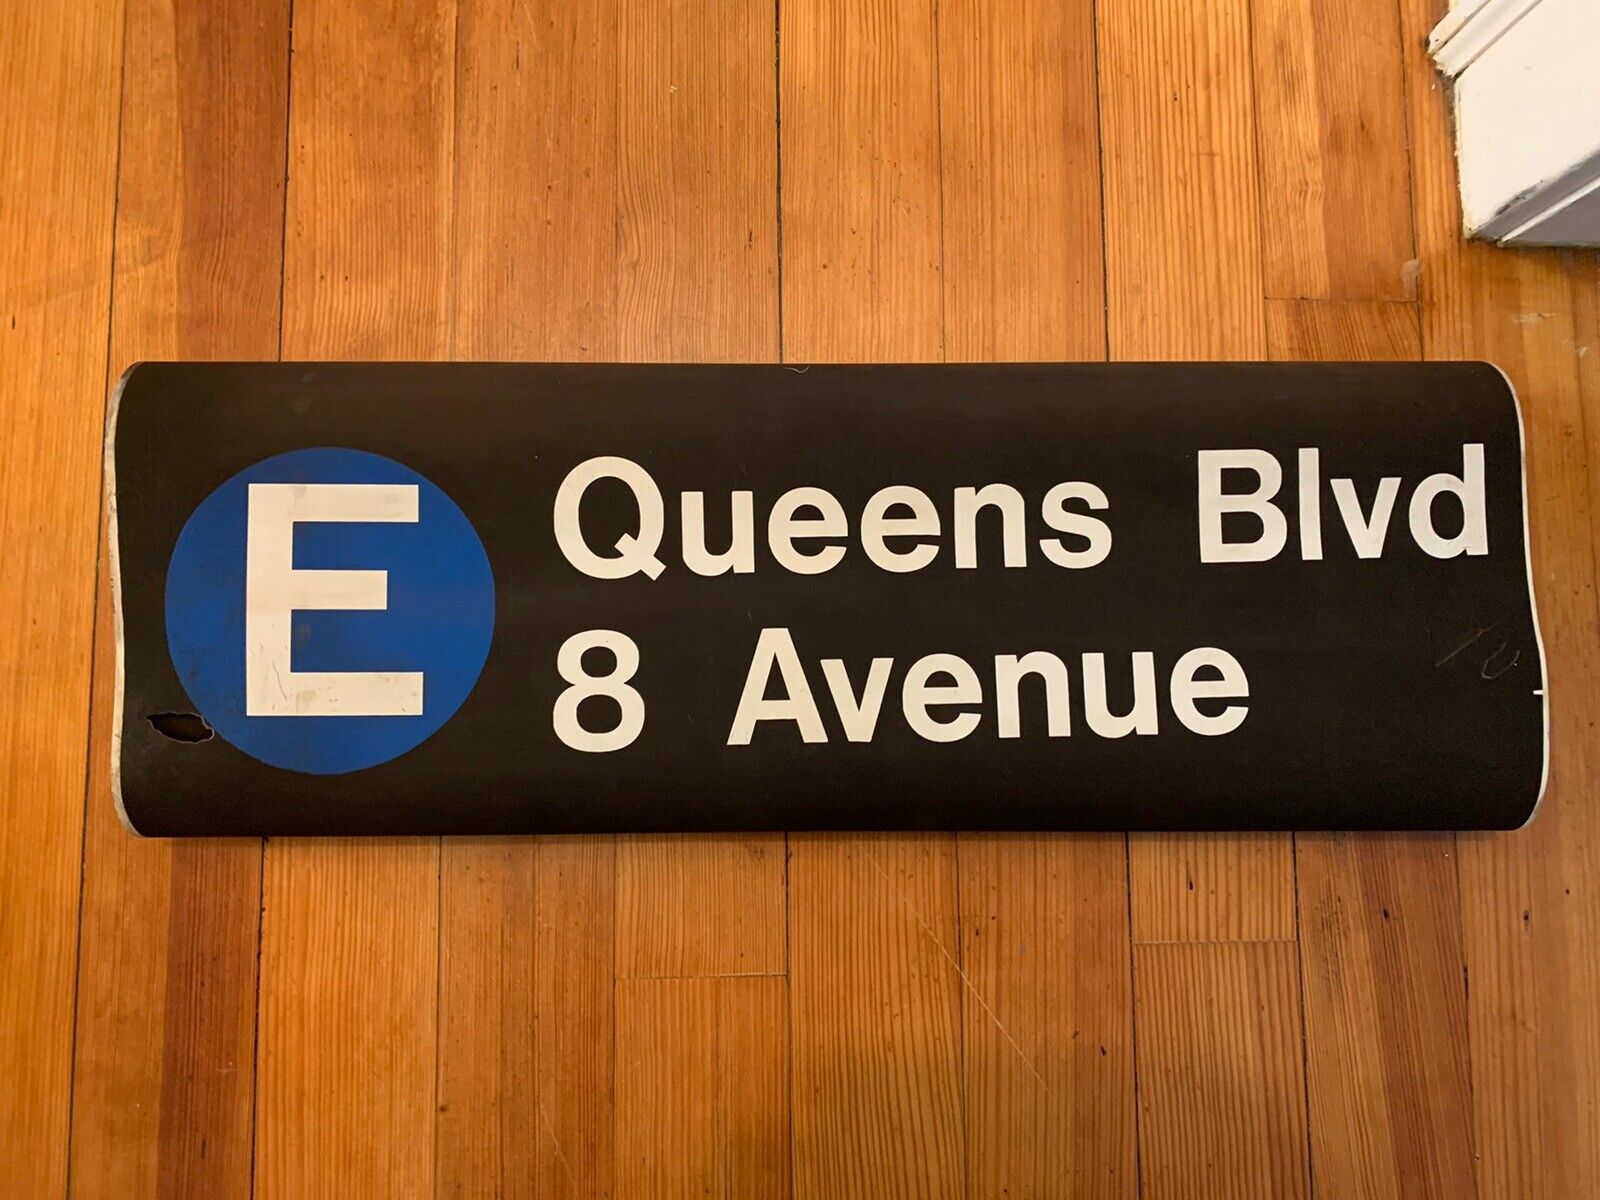 DAMAGED NY NYC SUBWAY ROLL SIGN E QUEENS BOULEVARD 8th AVENUE CENTRAL PARK WEST